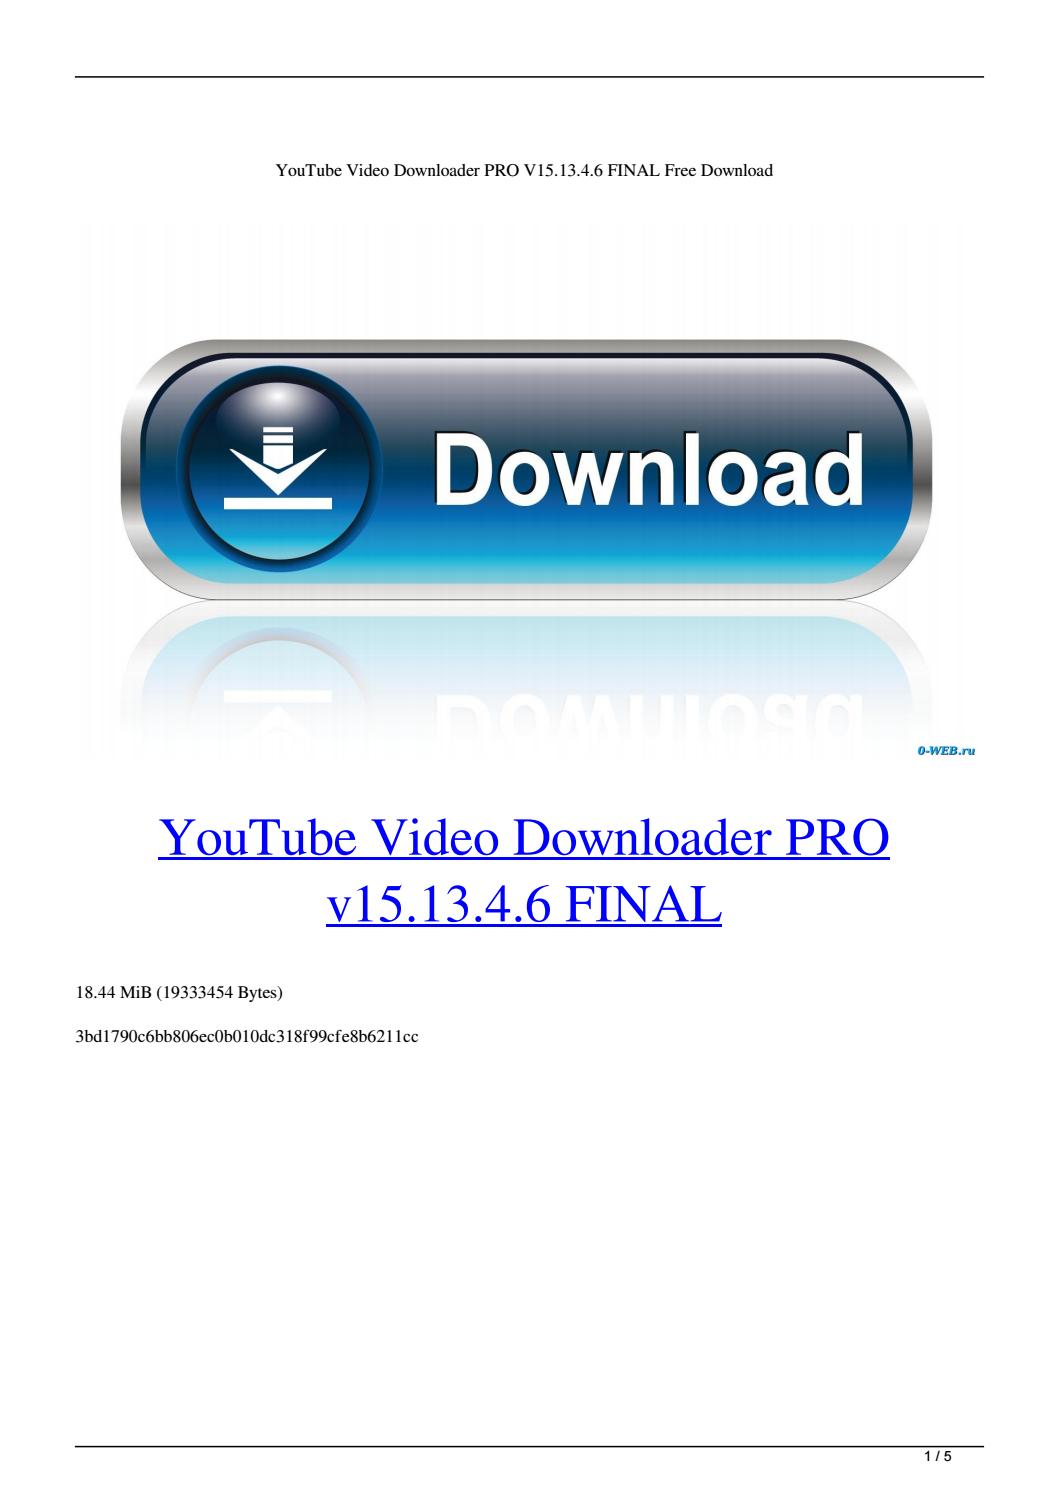 Youtube Video Downloader Pro Free Download